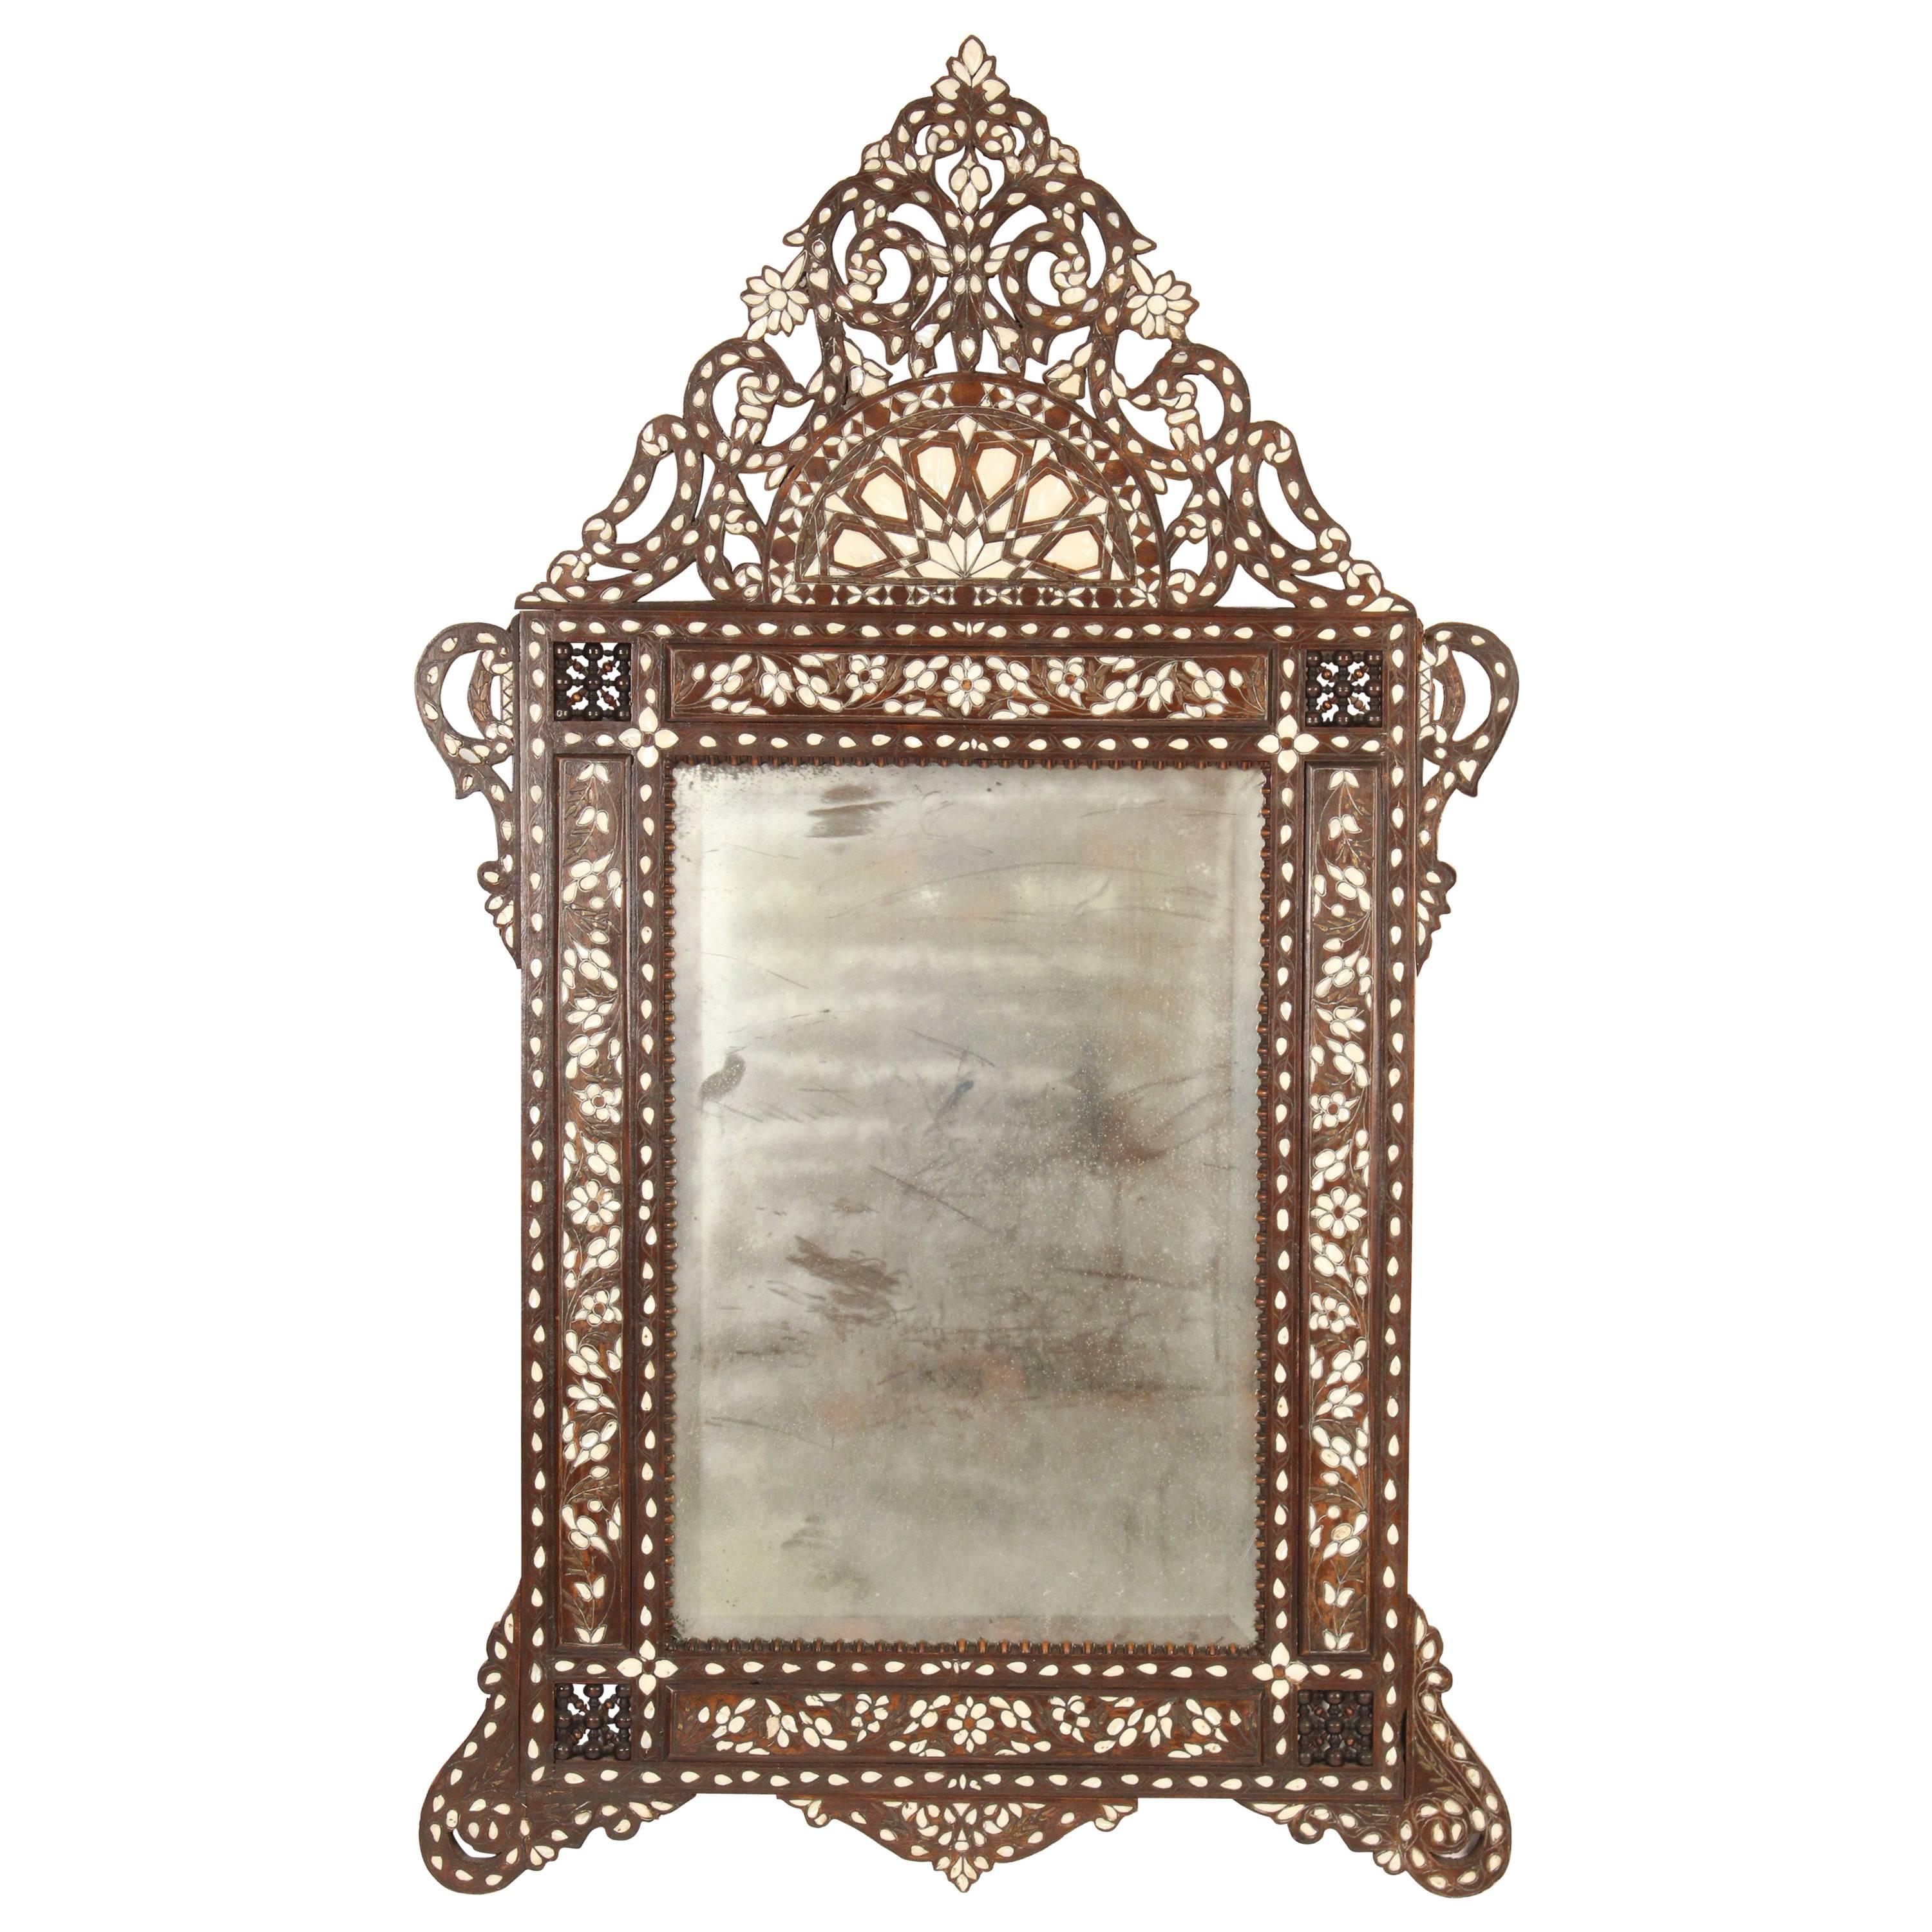 Middle Eastern Inlaid Mirror